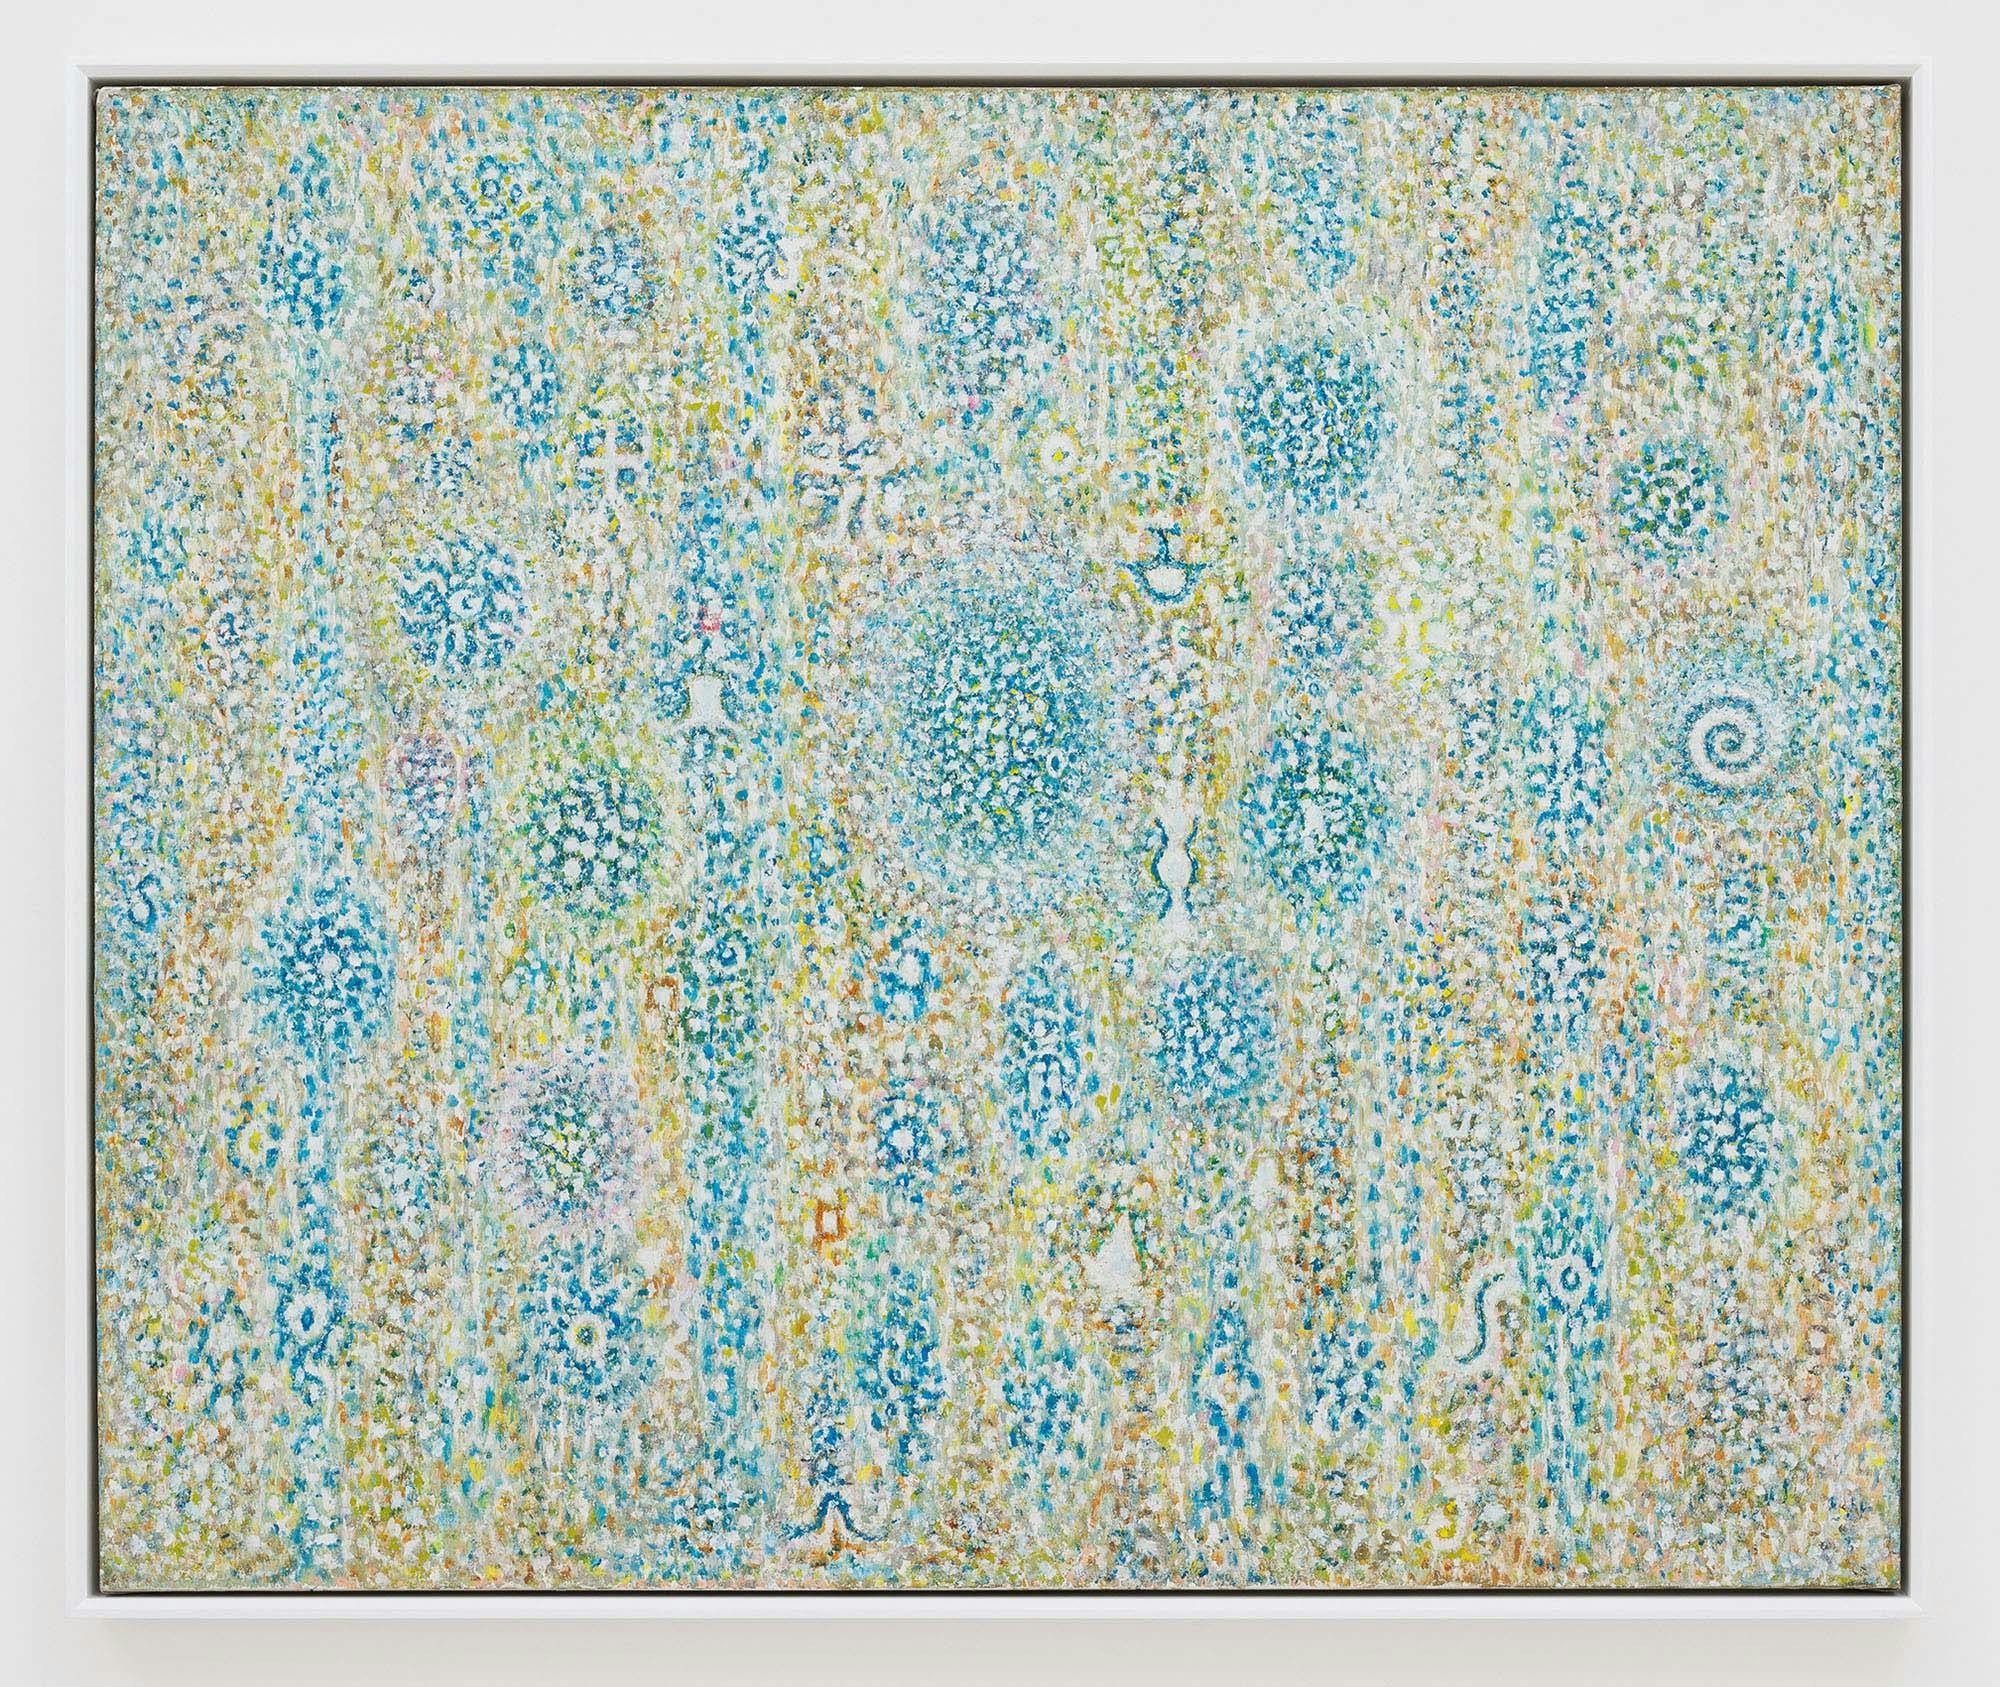 Sea Presence
Before 1968
Oil on canvas
40 x 48 in. (101.6 x 121.9 cm)
 – The Richard Pousette-Dart Foundation